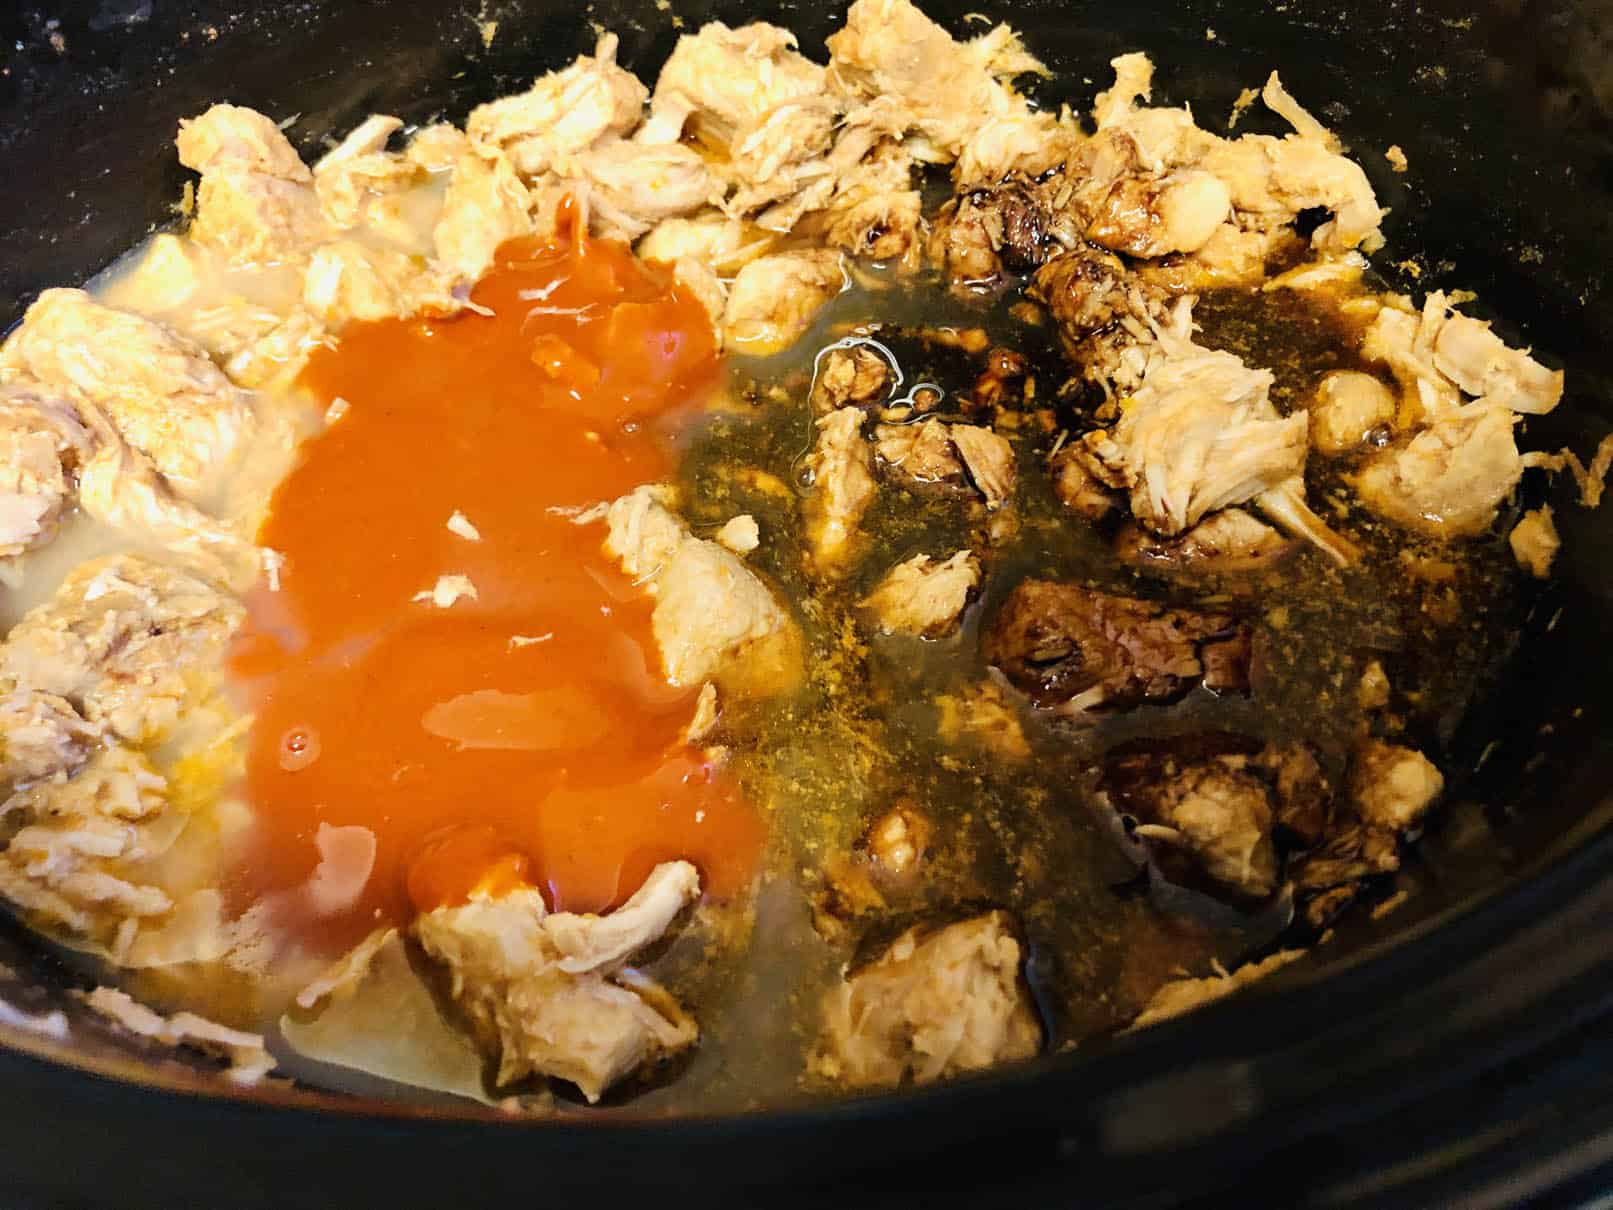 Adding sauces to cooked pork, cooked for 5 hours in a slow cooker